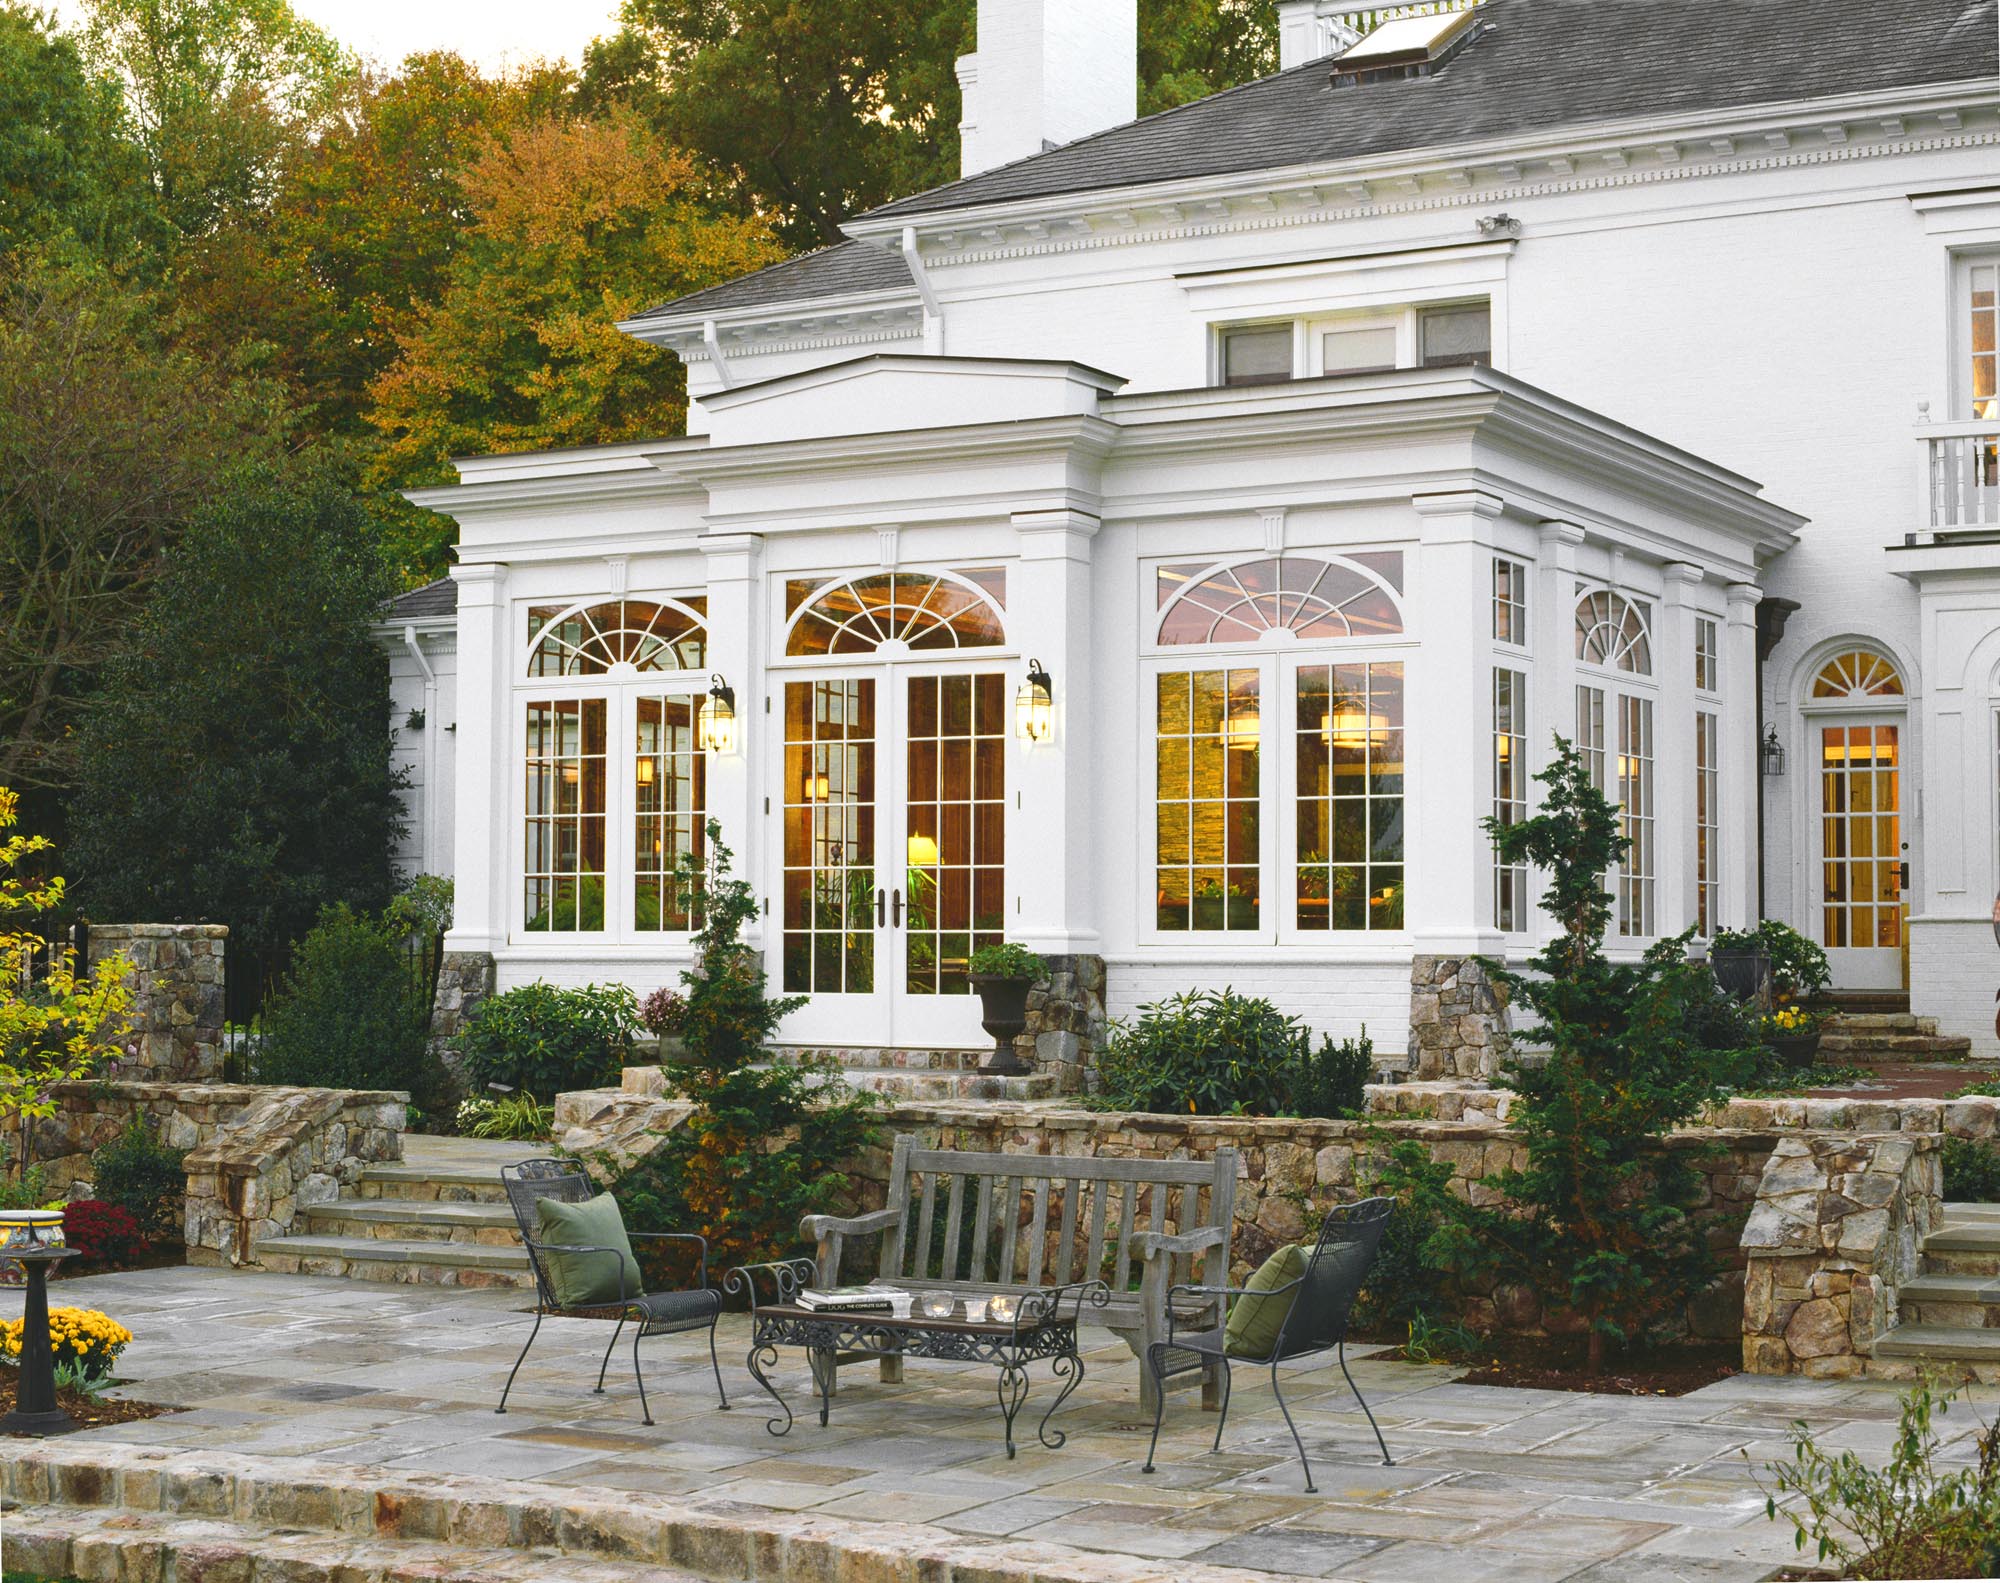 custom orangery | exterior view | flows well with current house